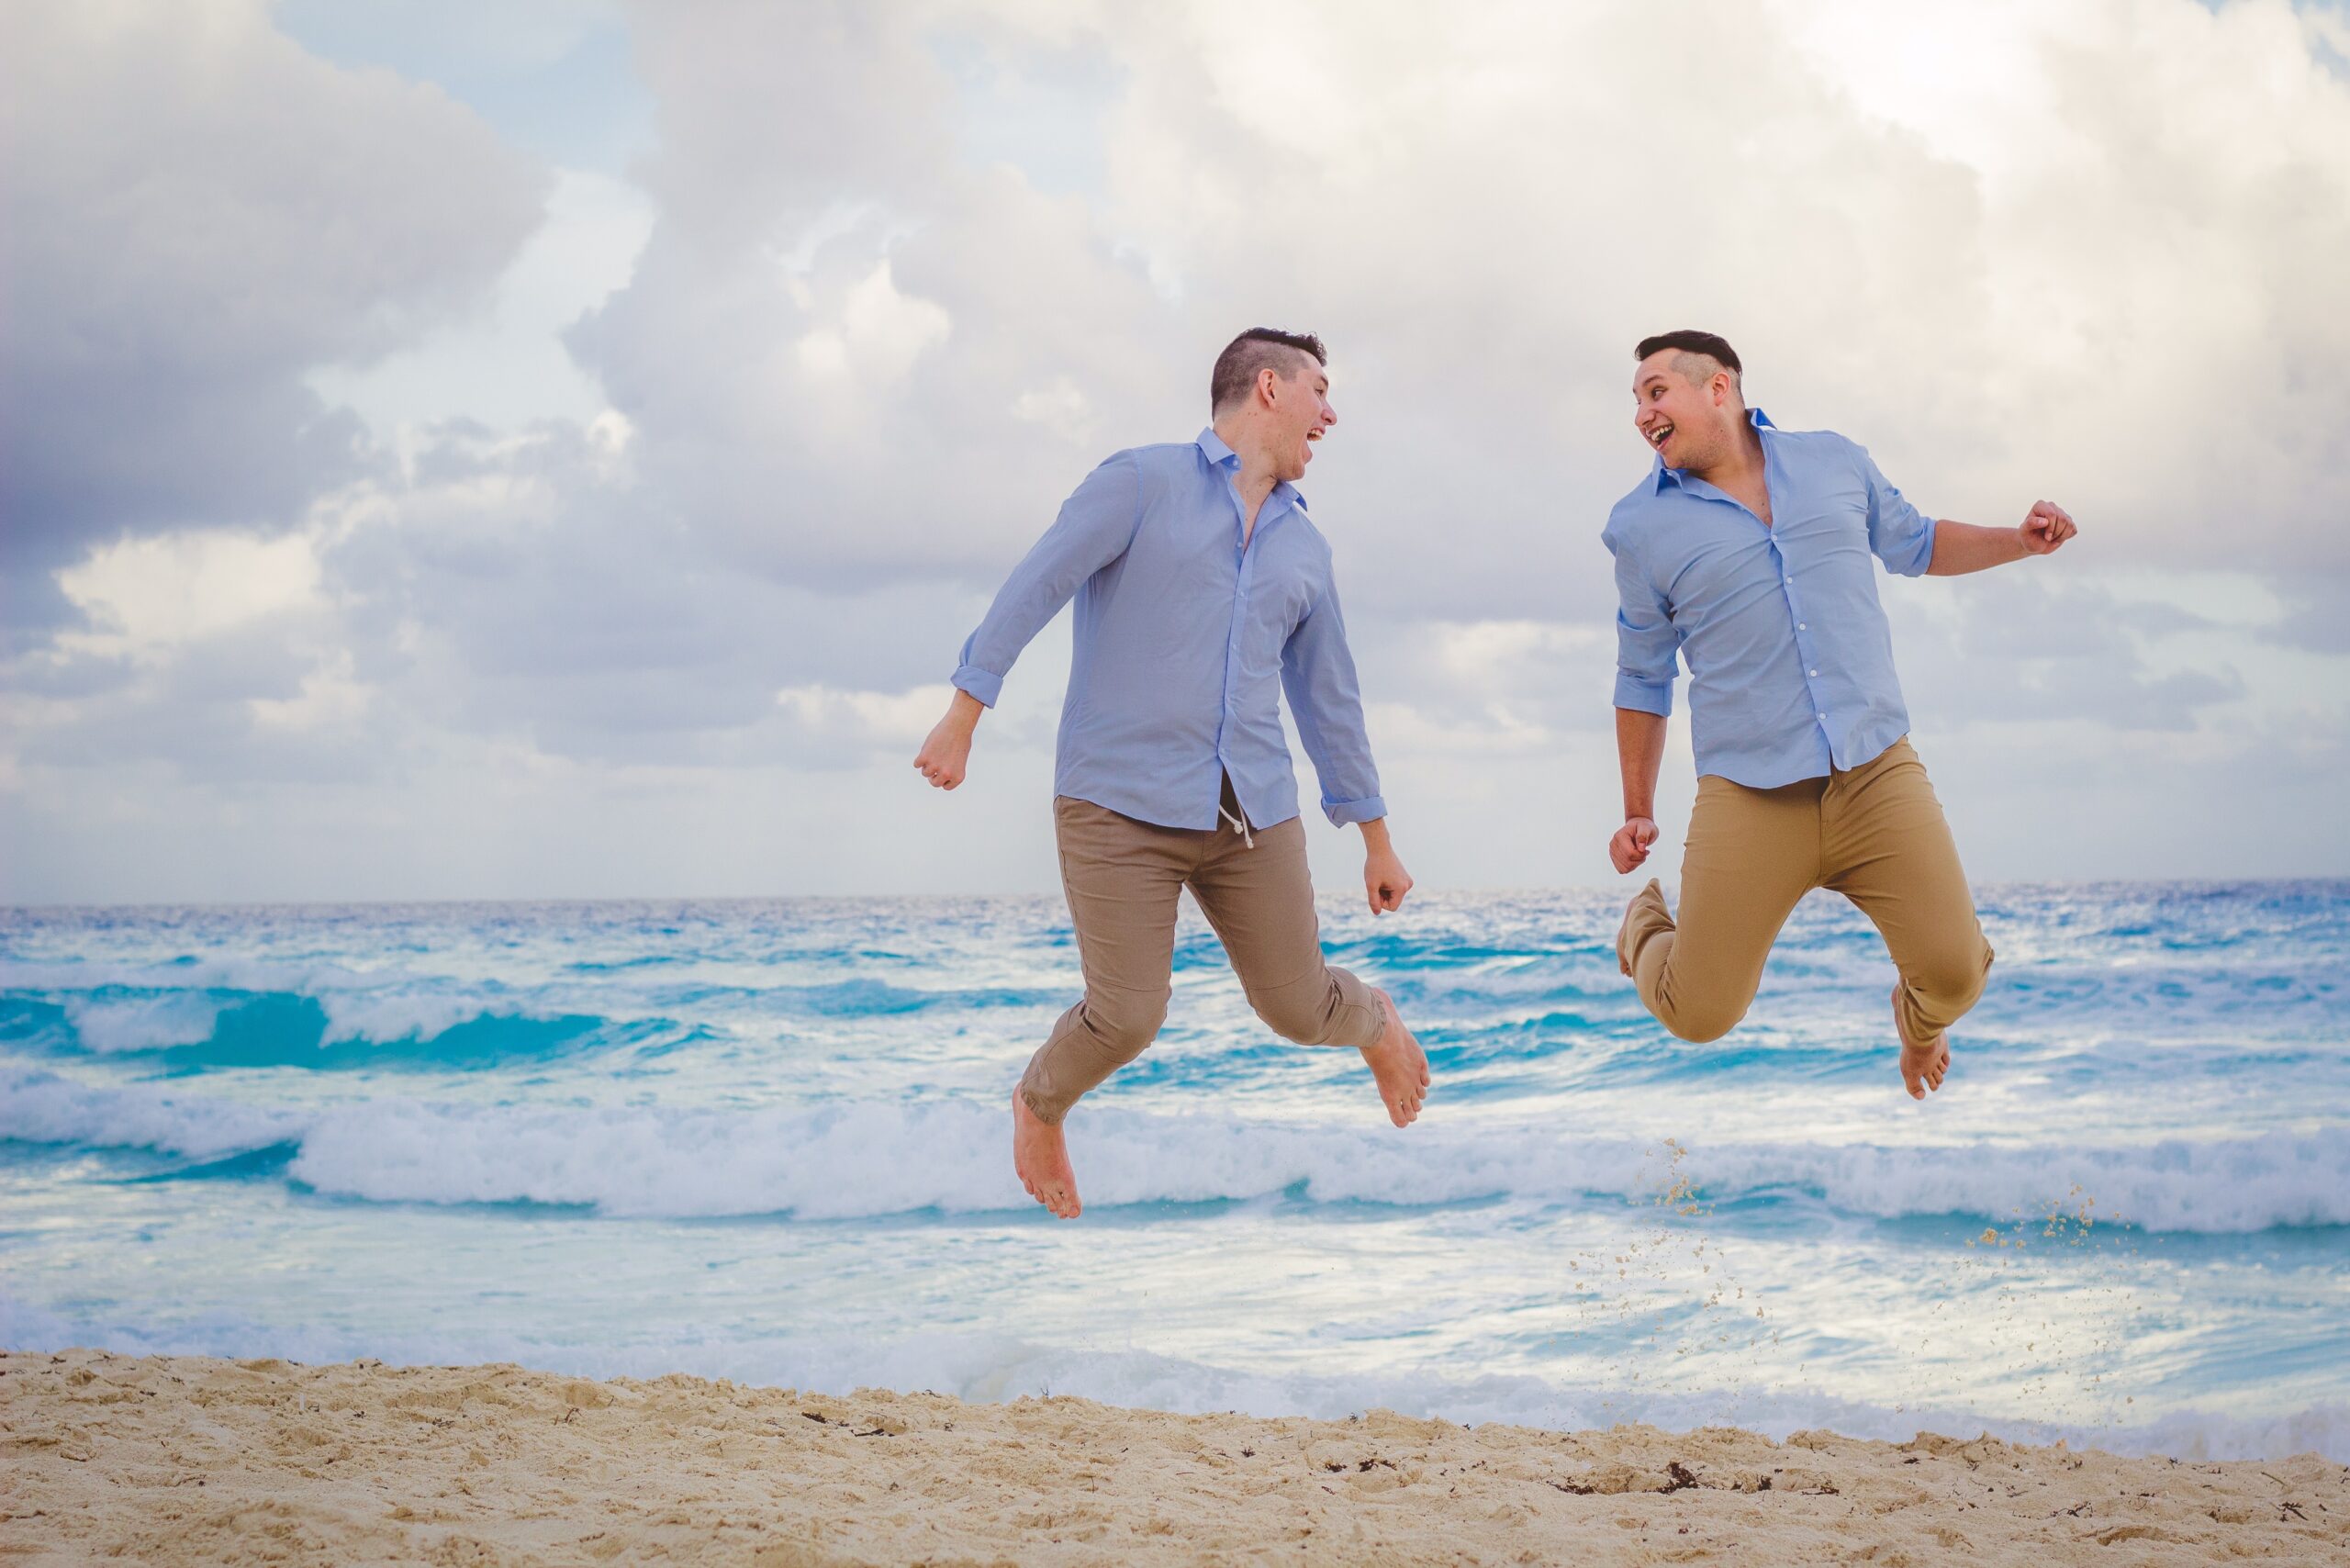 Jared Dailey and Jordan Taylor on a beach in Cancun, Mexico (Photo Credit: JJ Cruise)